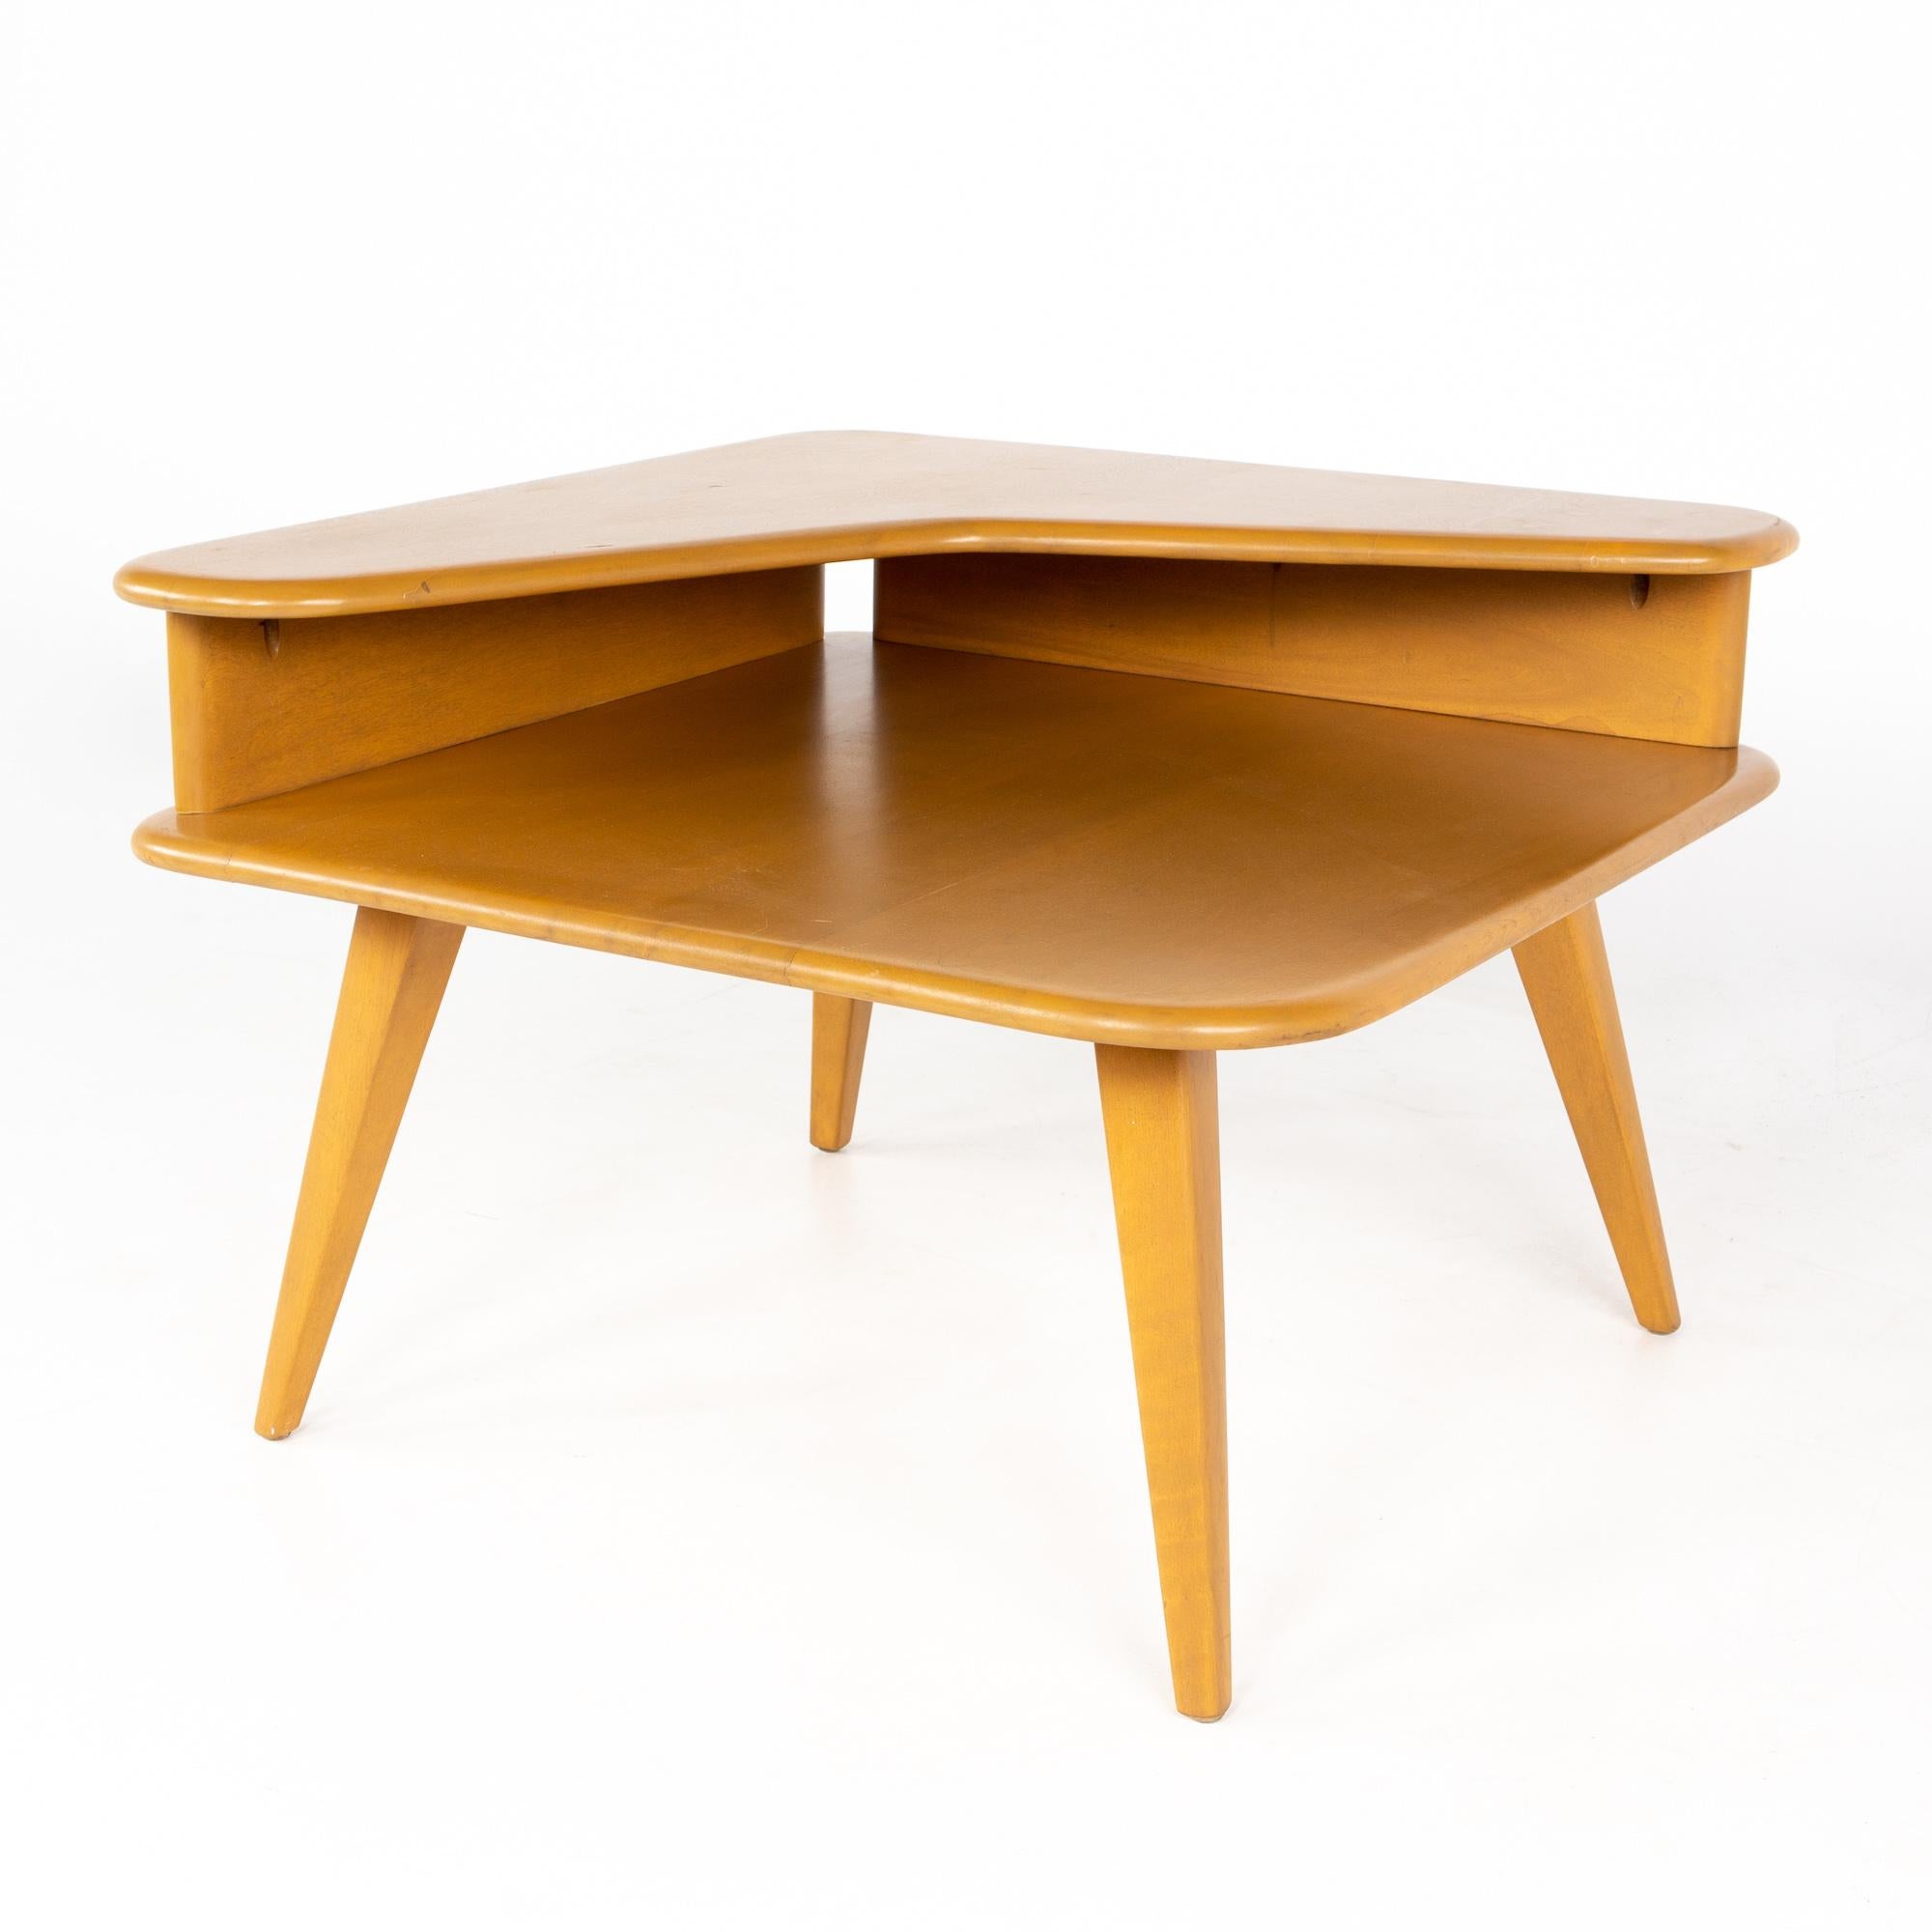 Heywood Wakefield mid century wheat step corner table.

This table measures: 30 wide x 30 deep x 22 inches high.

All pieces of furniture can be had in what we call restored vintage condition. That means the piece is restored upon purchase so